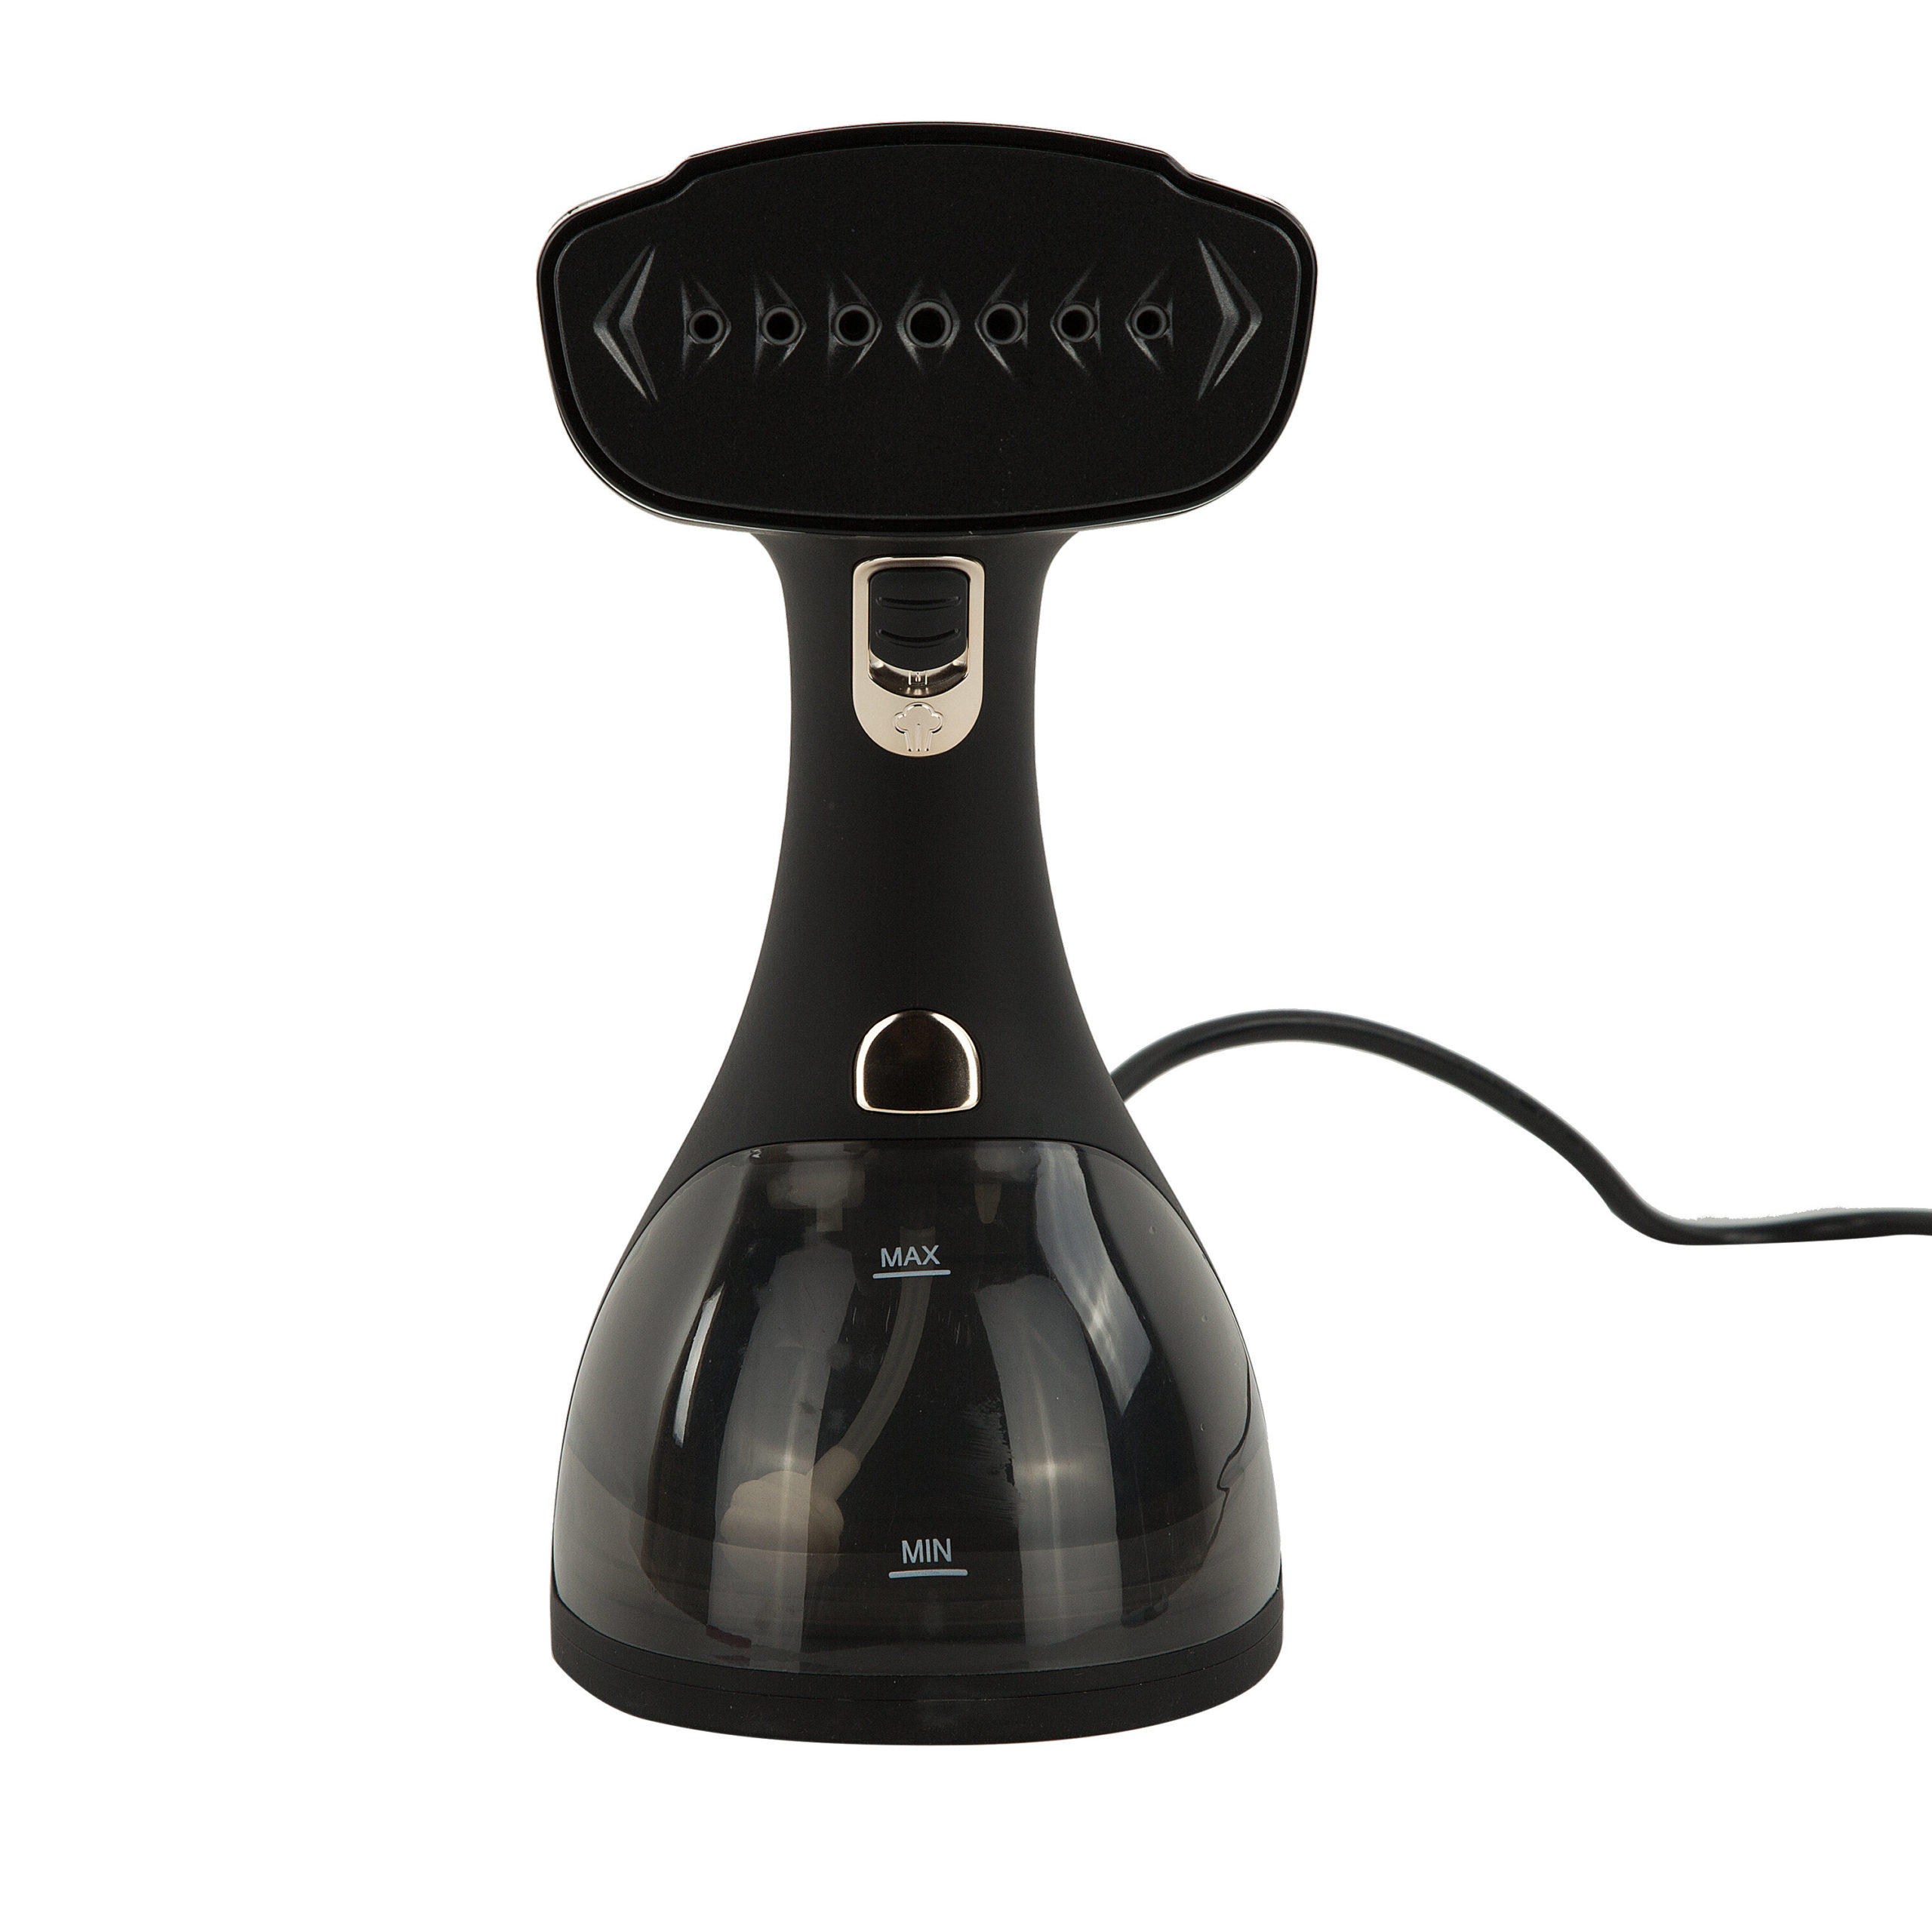 Electrolux Handheld Steamer Review